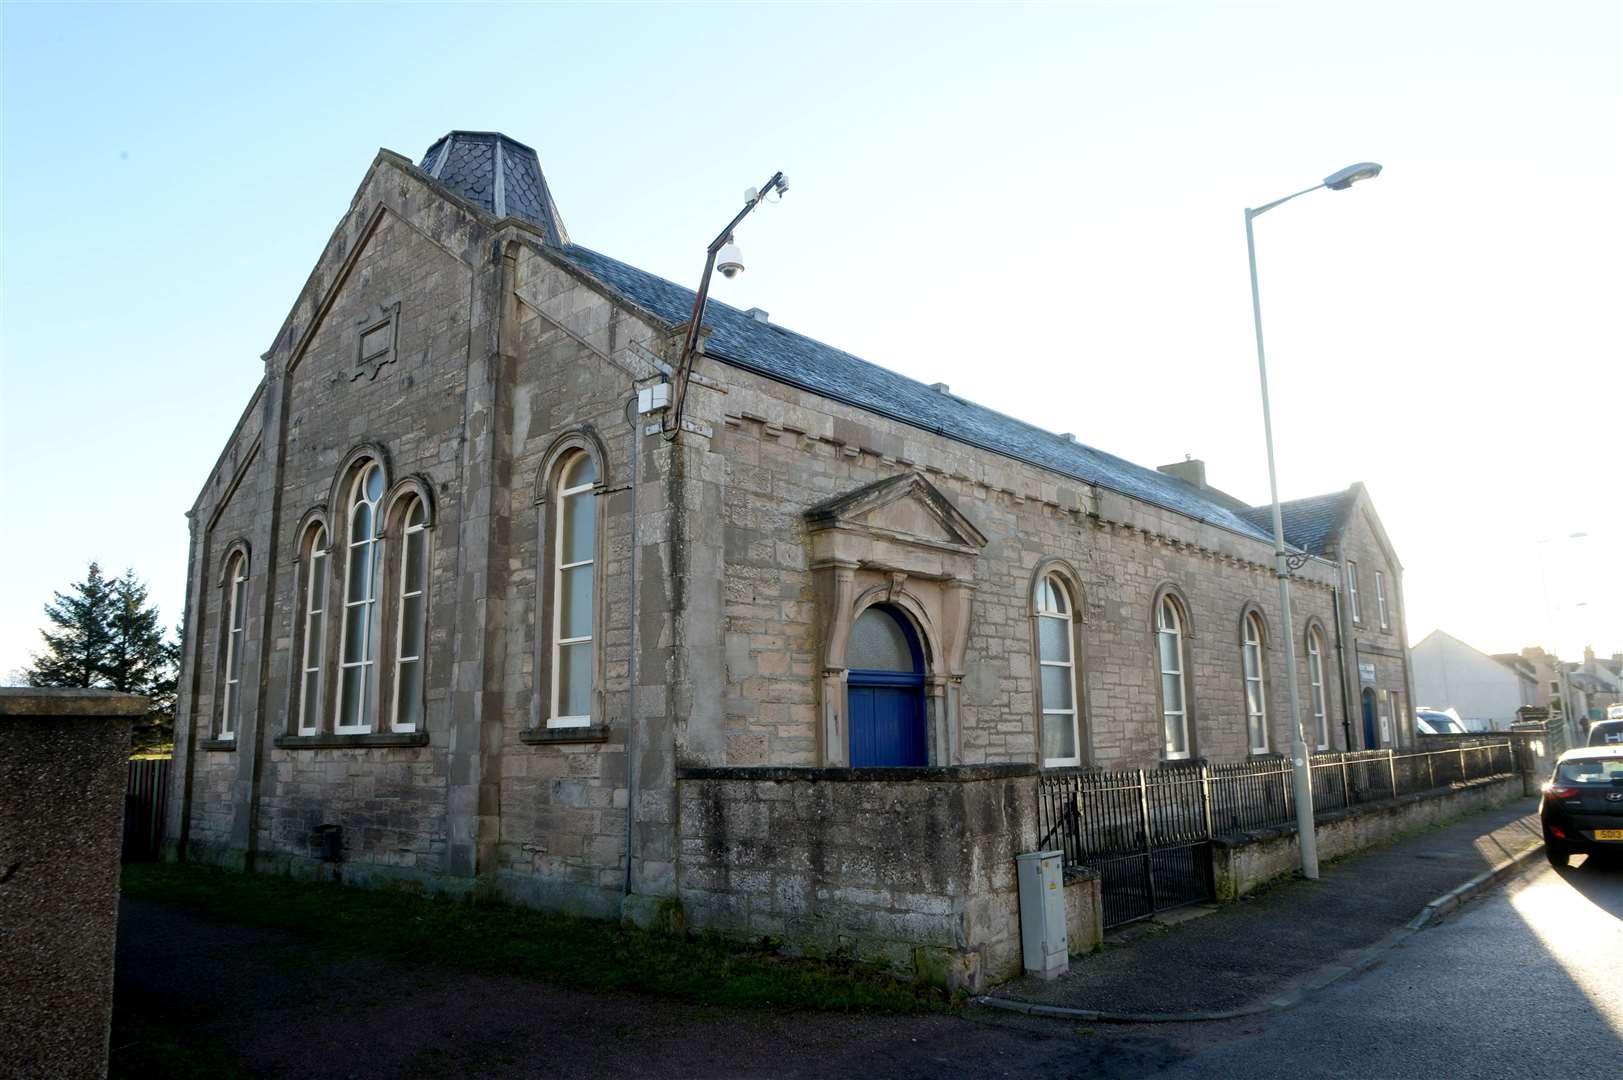 The Seaman's Hall in Harbour Street, Nairn.